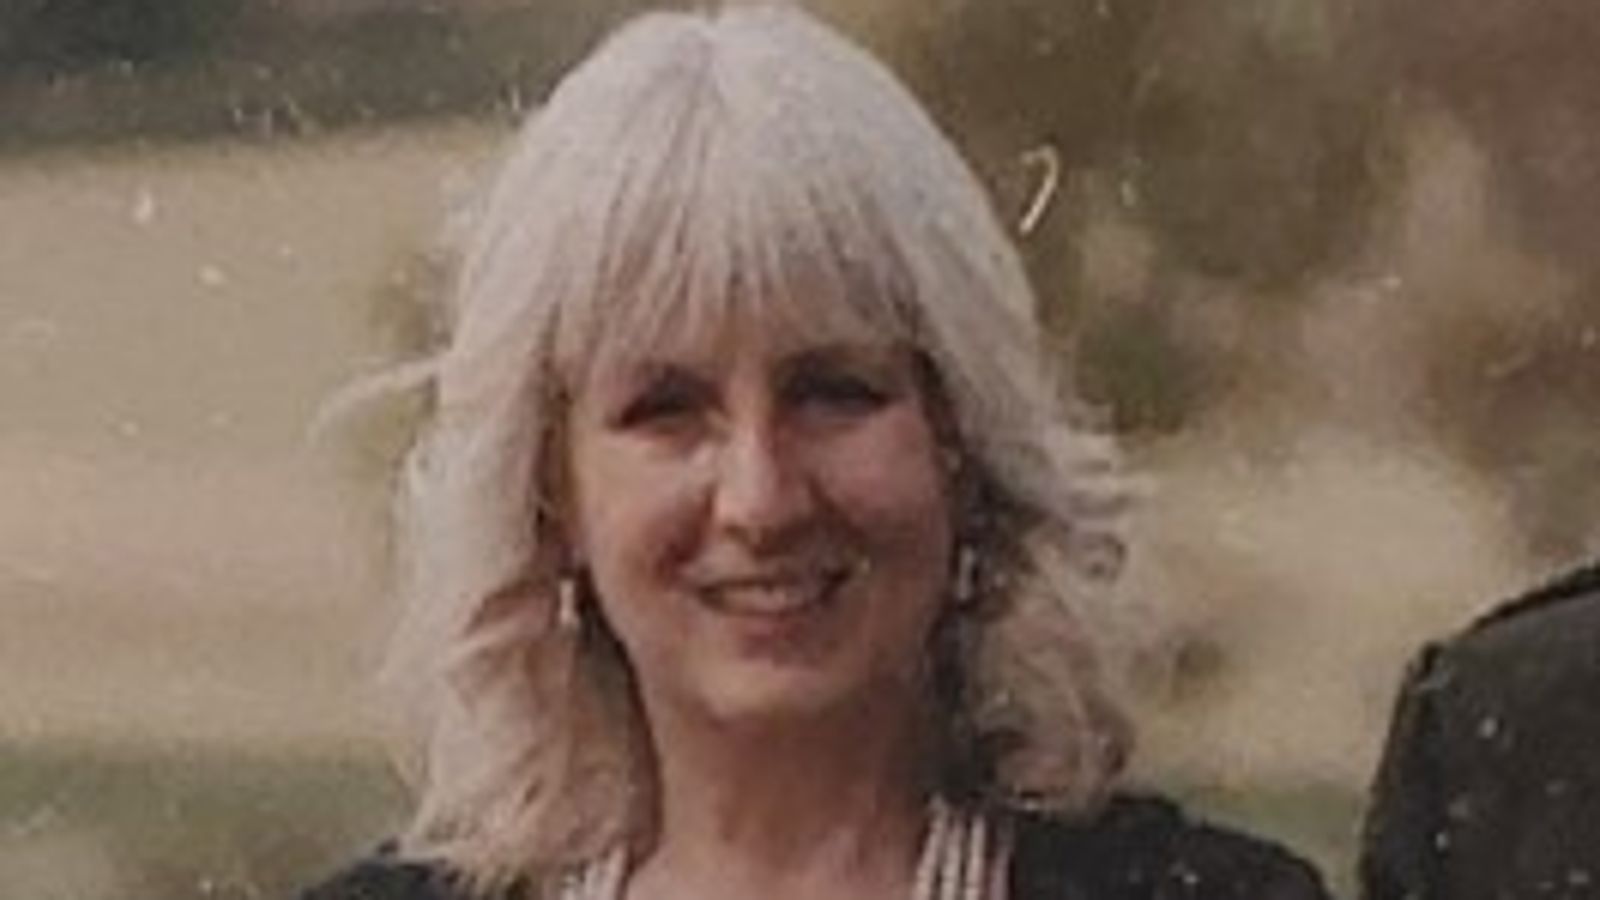 Police Scotland search for missing woman Clare Marshall who disappeared in Perth